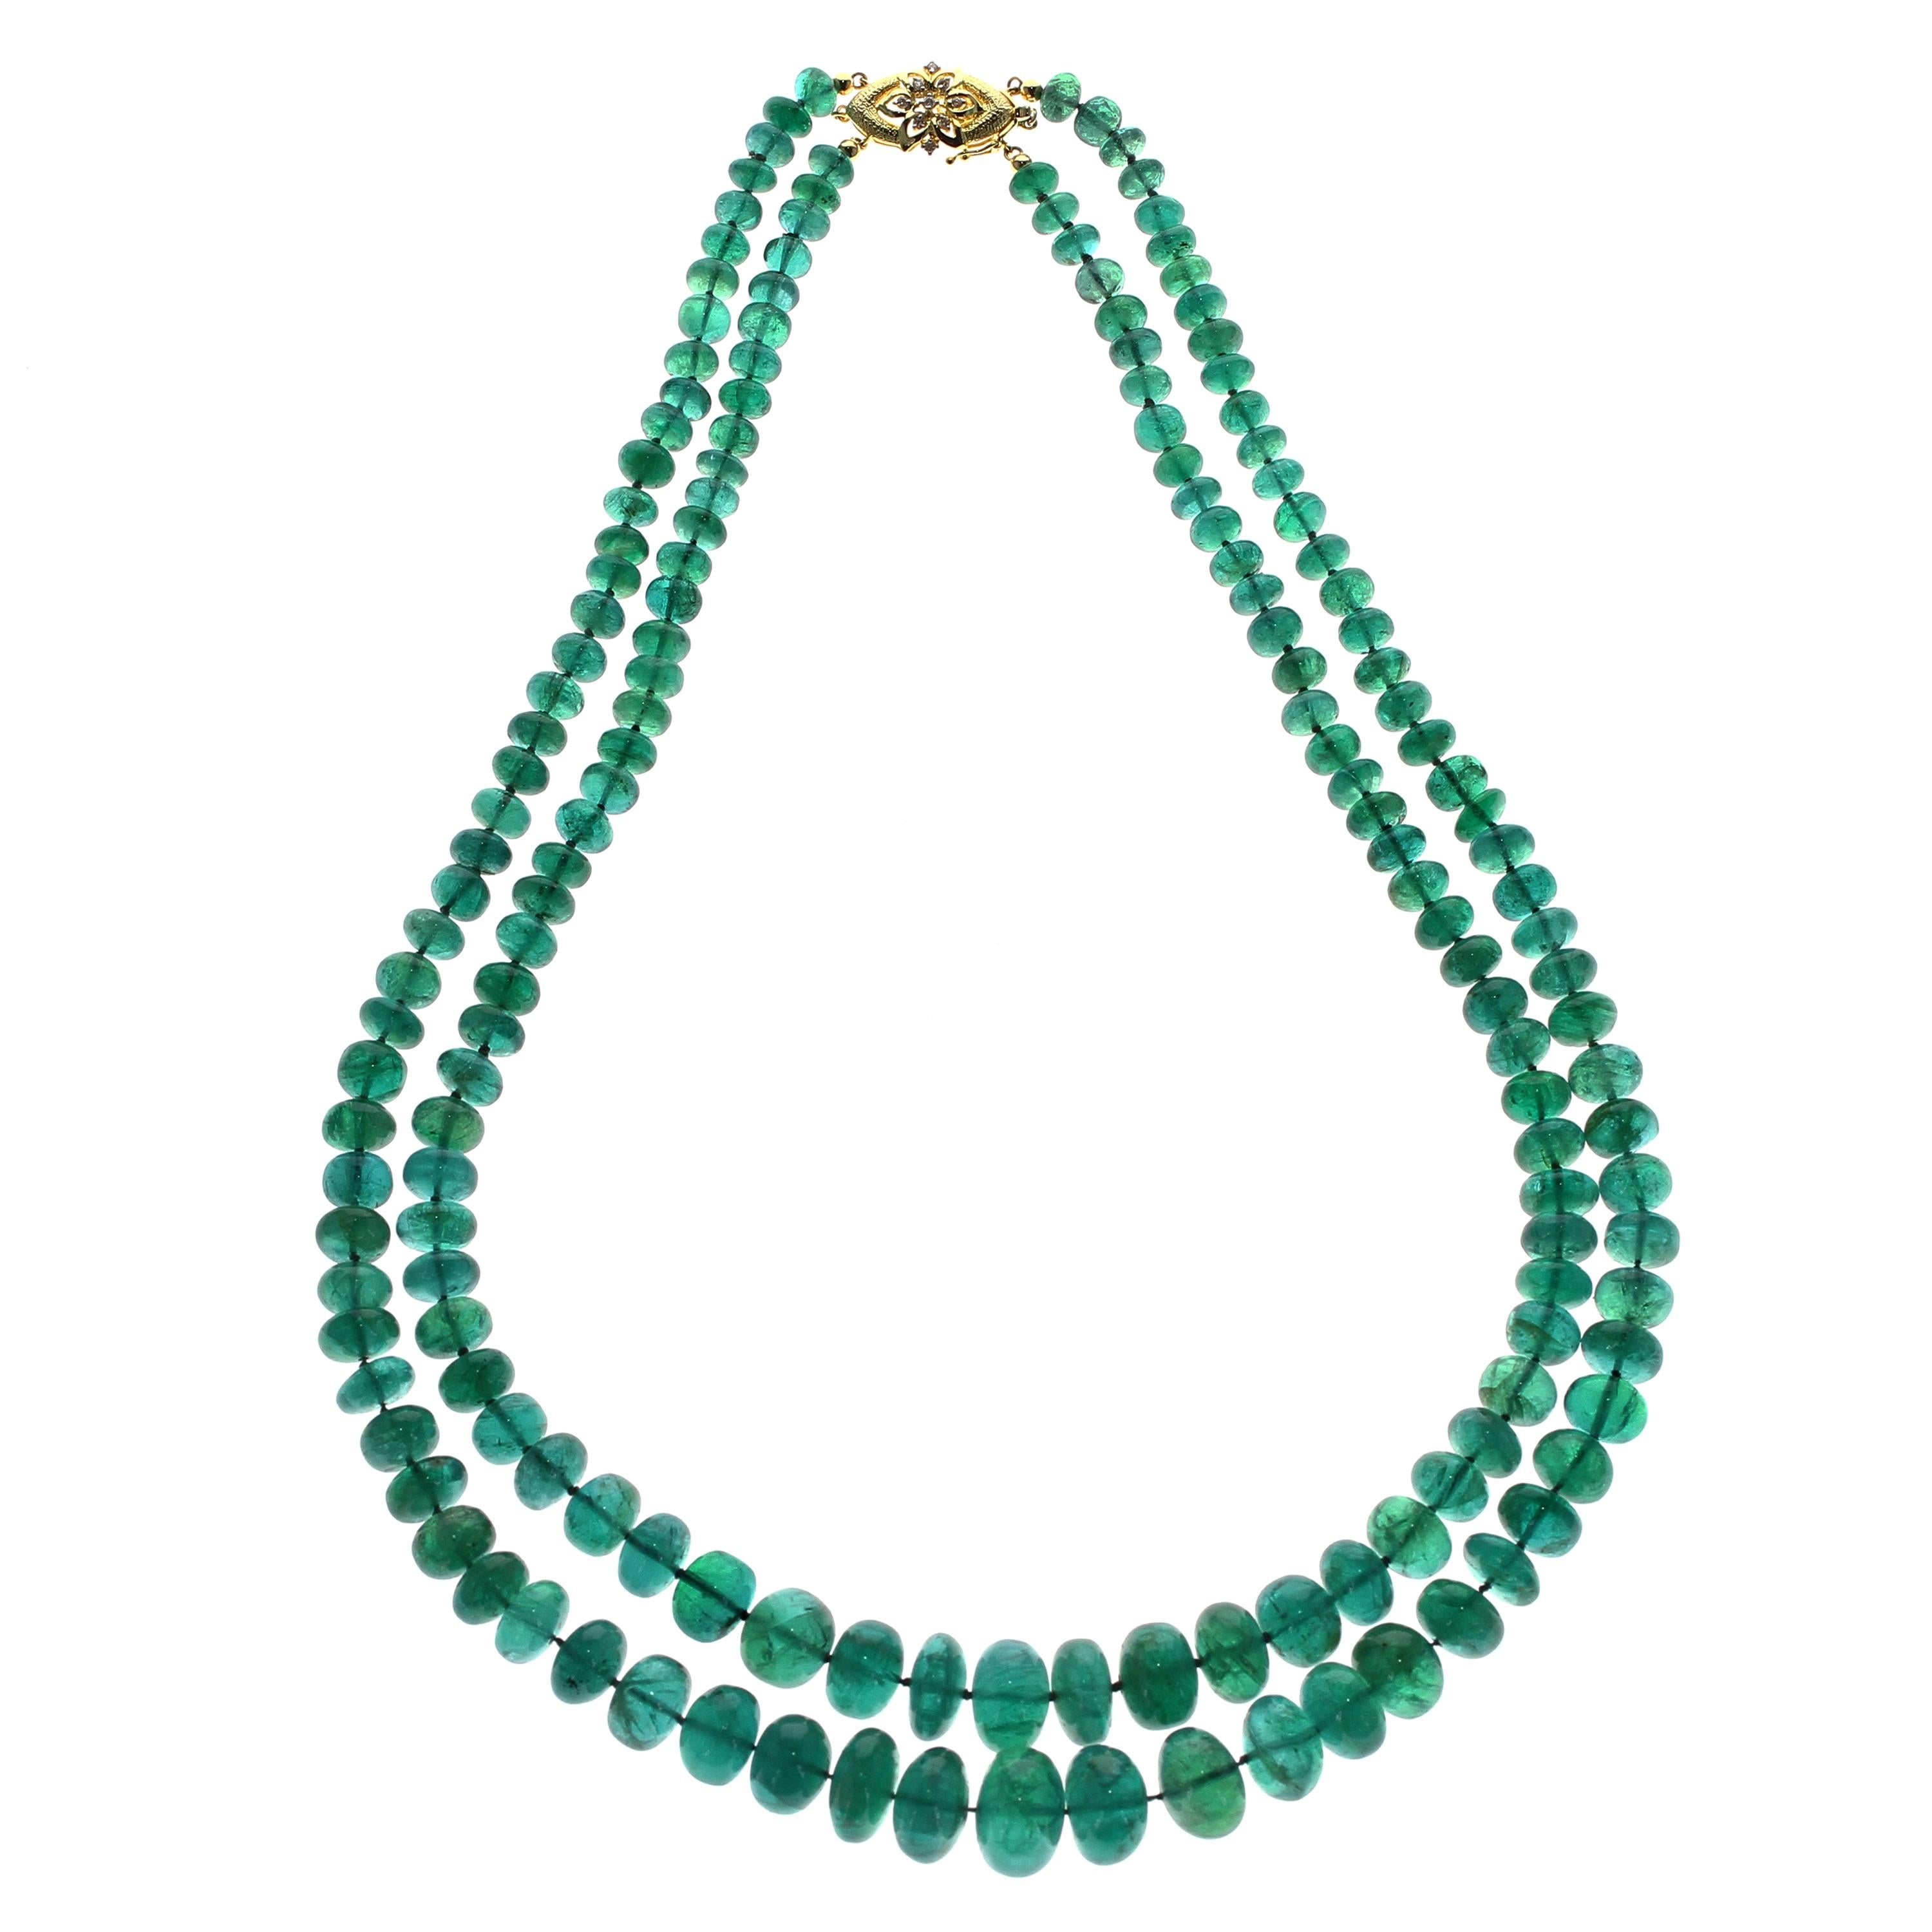 Impressive Emerald Bead Yellow Gold Necklace For Sale